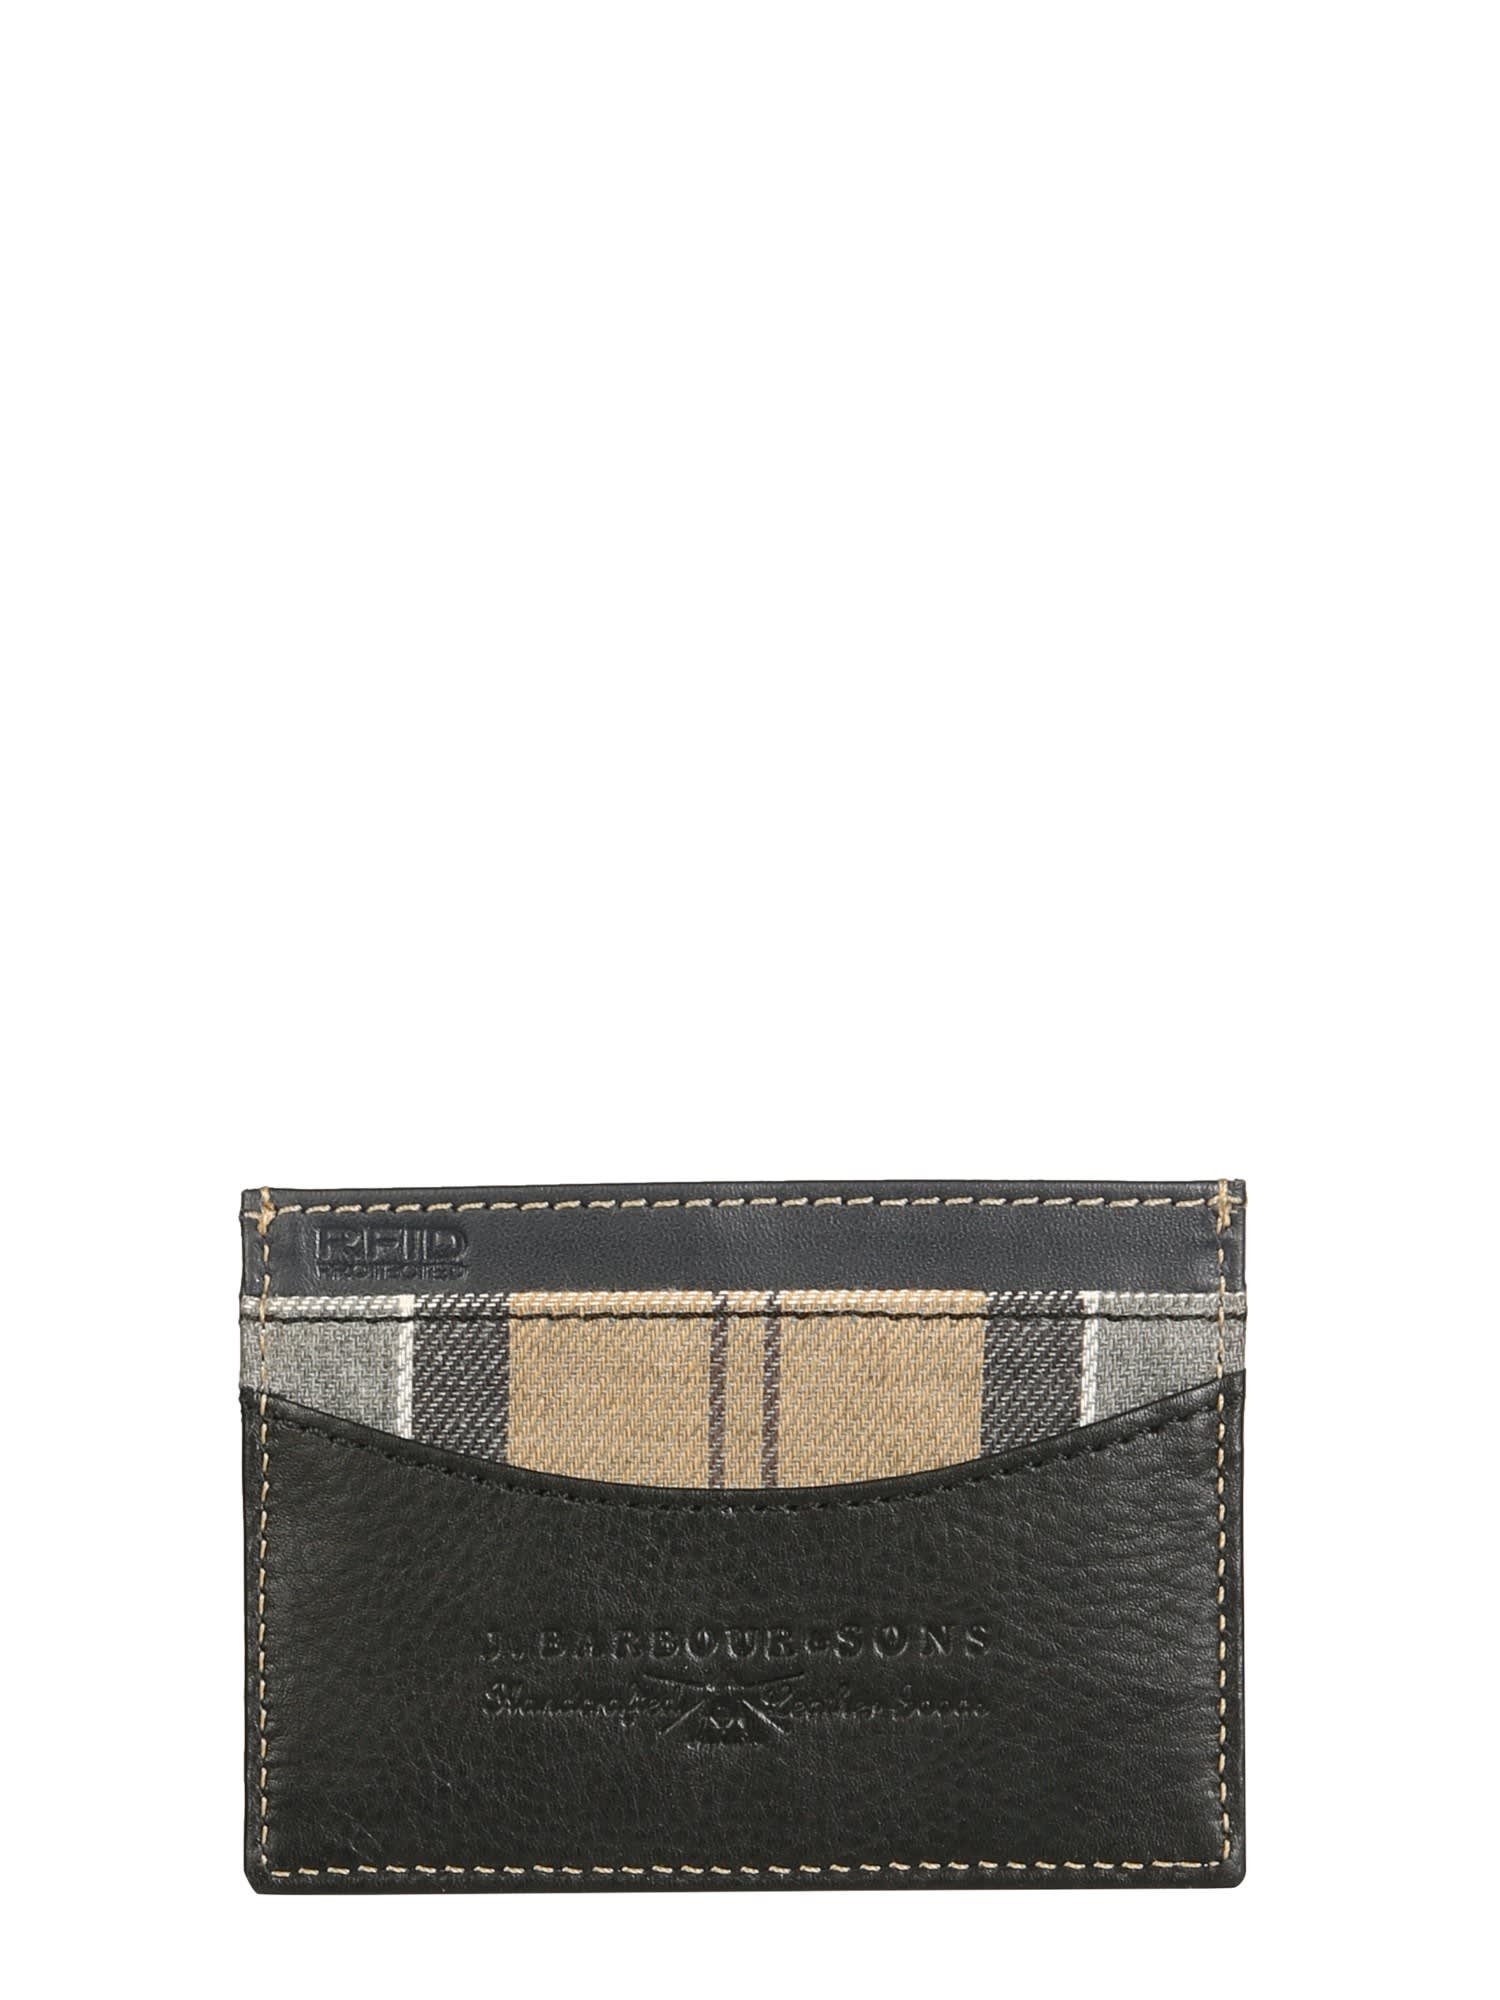 Barbour Card Holder With Logo